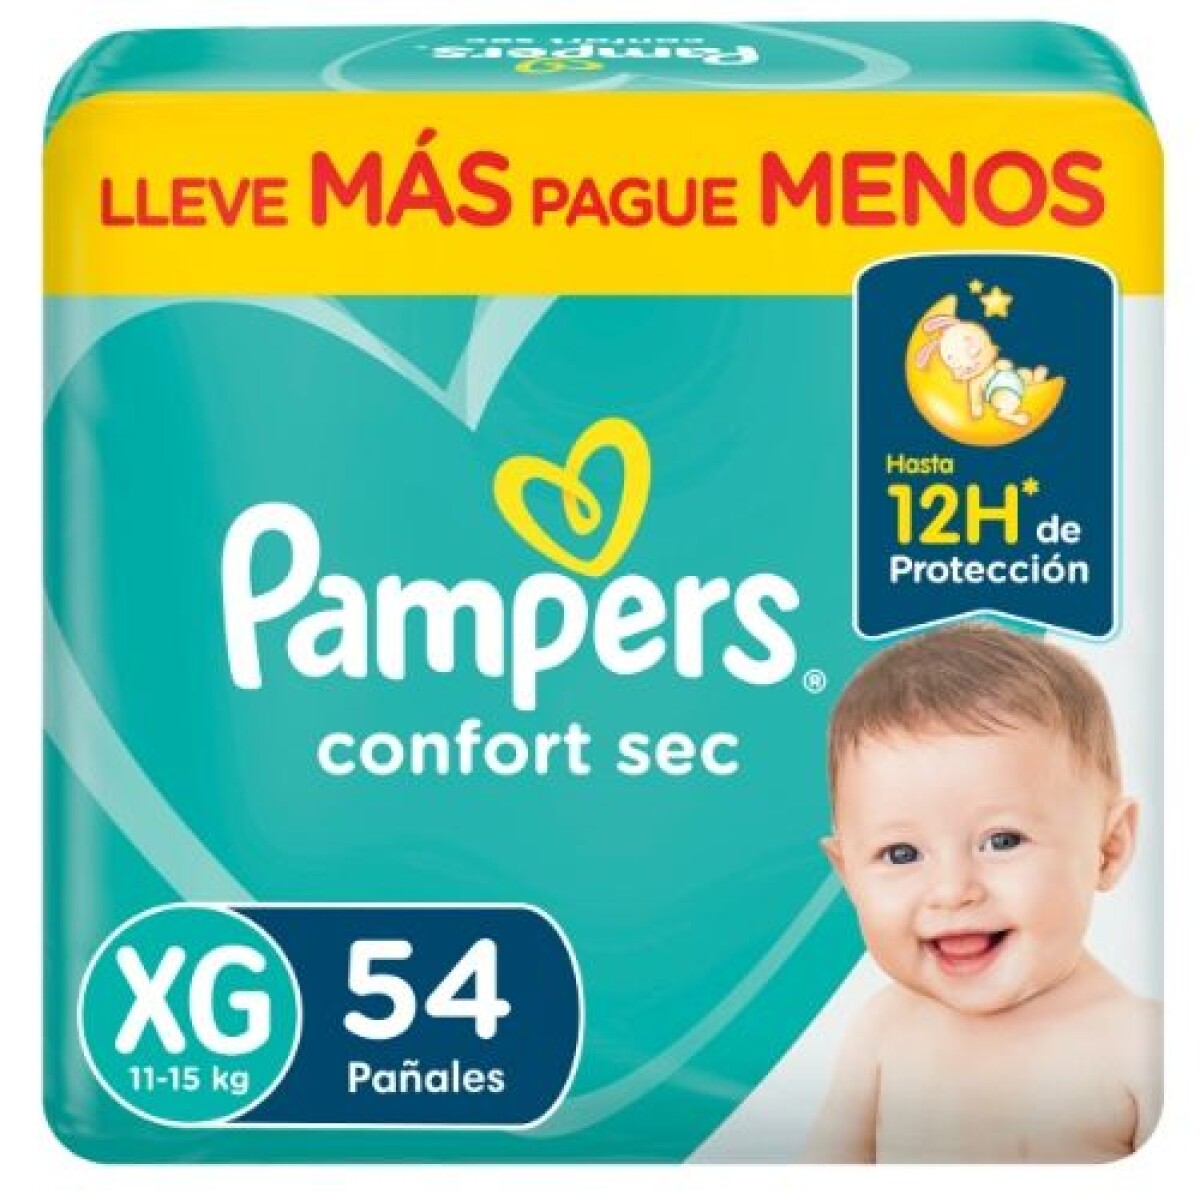 Pañales Pampers Confort Sec XG 58 unidades 